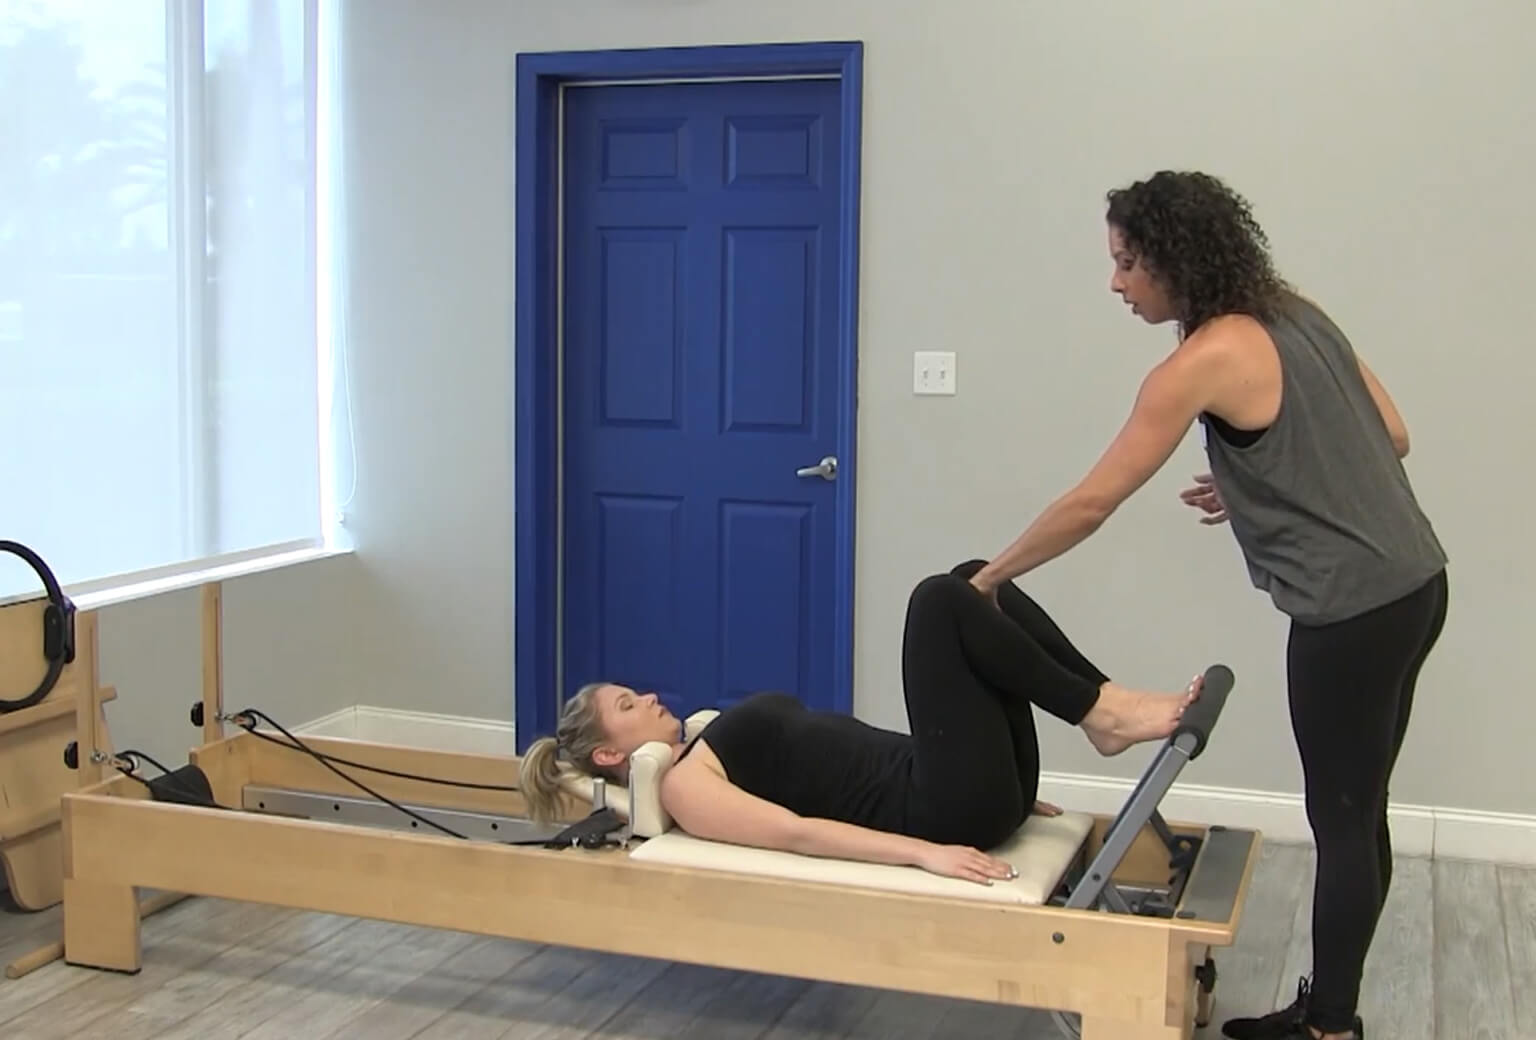 You are currently viewing Reformer with Mini Ball with Lauren Small